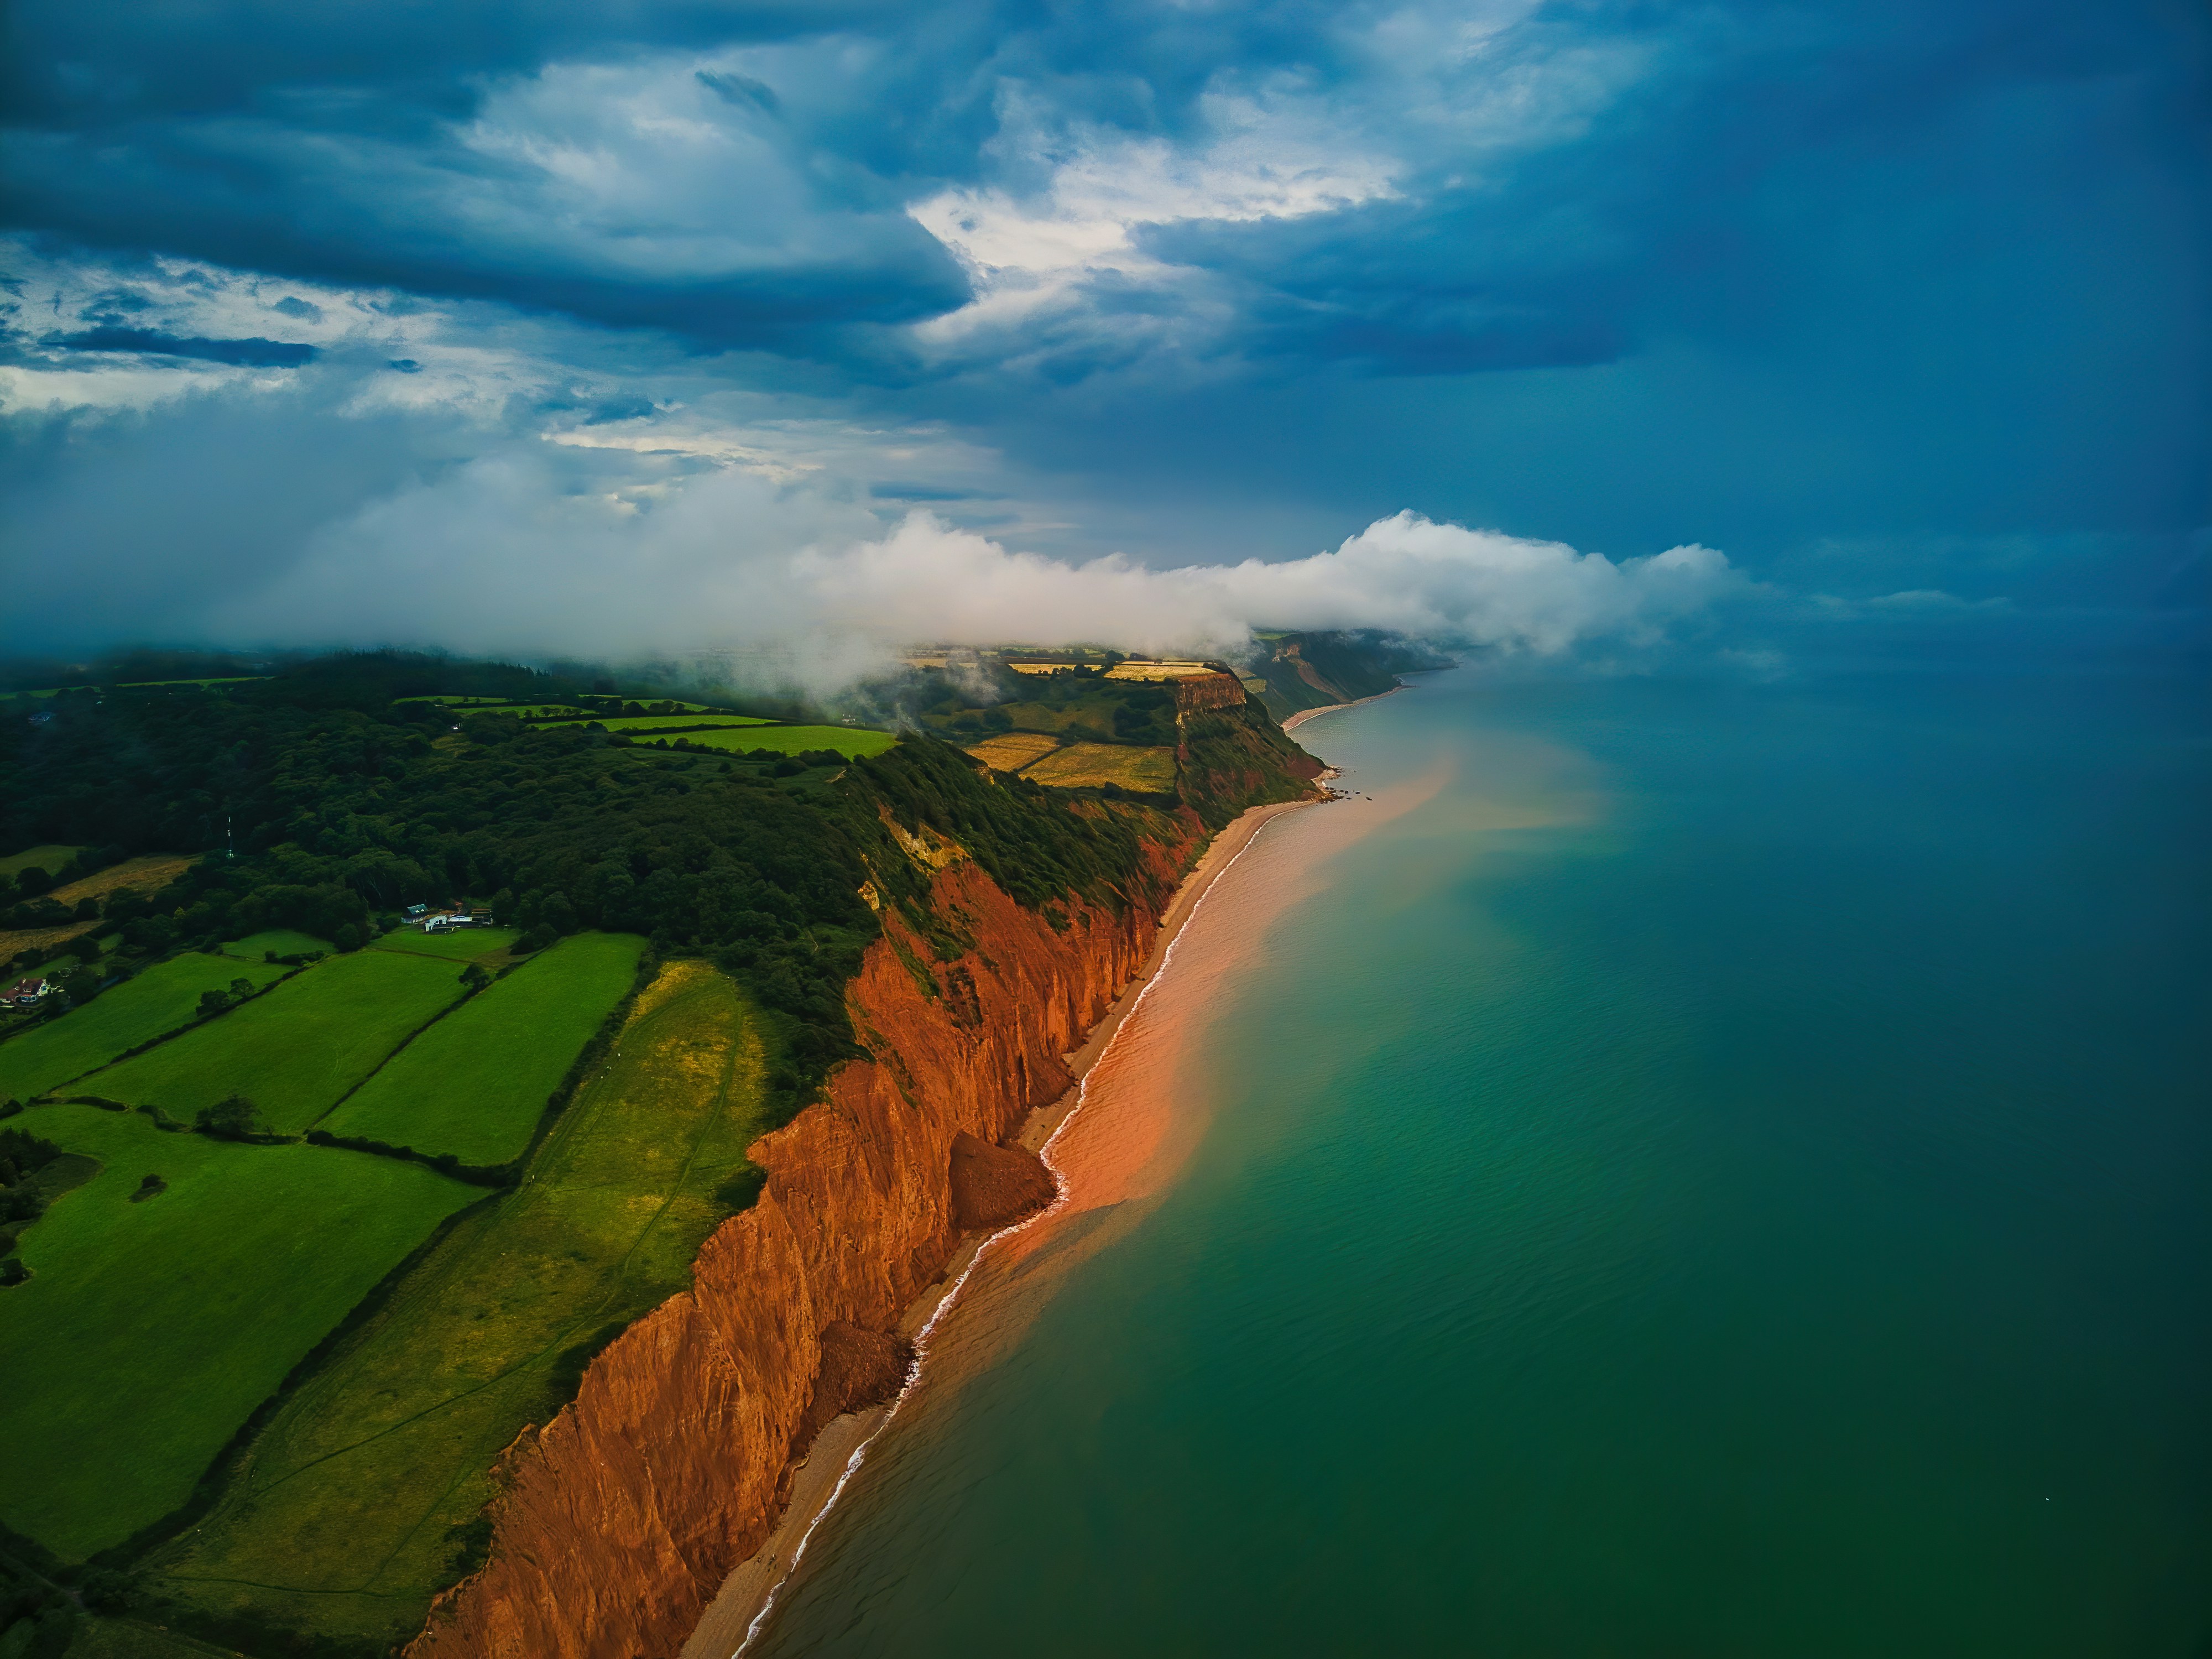 Cloud Cover. Summer storm clouds barrelling across the cliffs of the Jurassic Coast, Sidmouth, UK